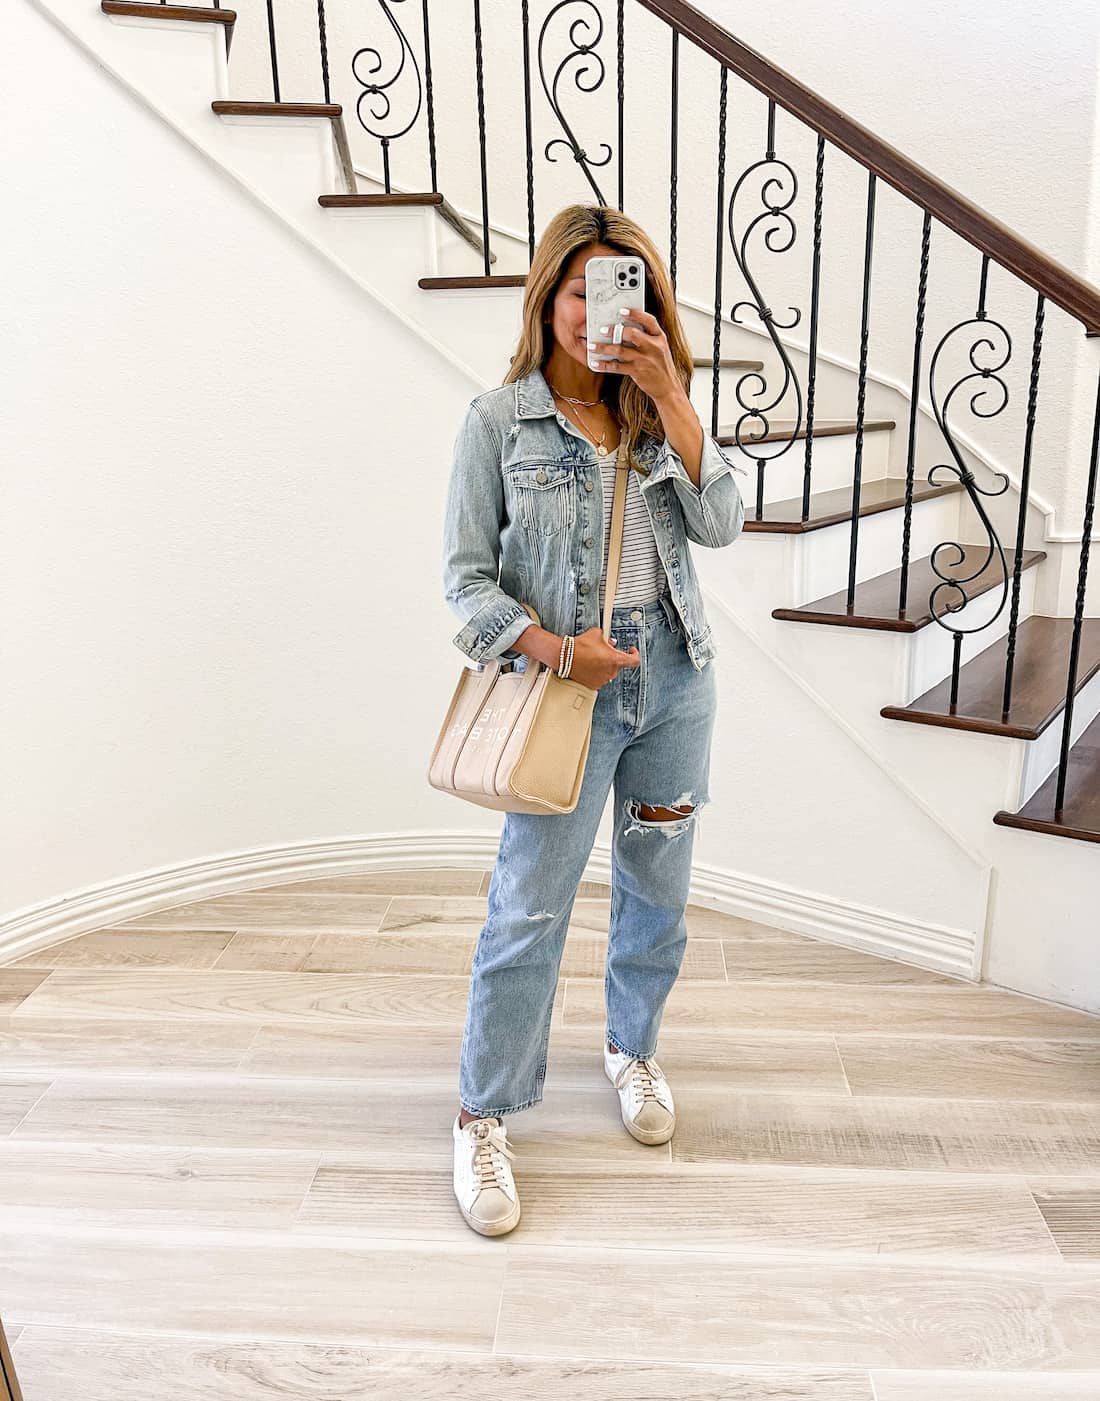 https://www.elvieinthecity.com/wp-content/uploads/2022/04/20220405-spring-outfit-striped-tee-denim-jacket-white-sneakers-marc-jacobs-tote-bag.jpg